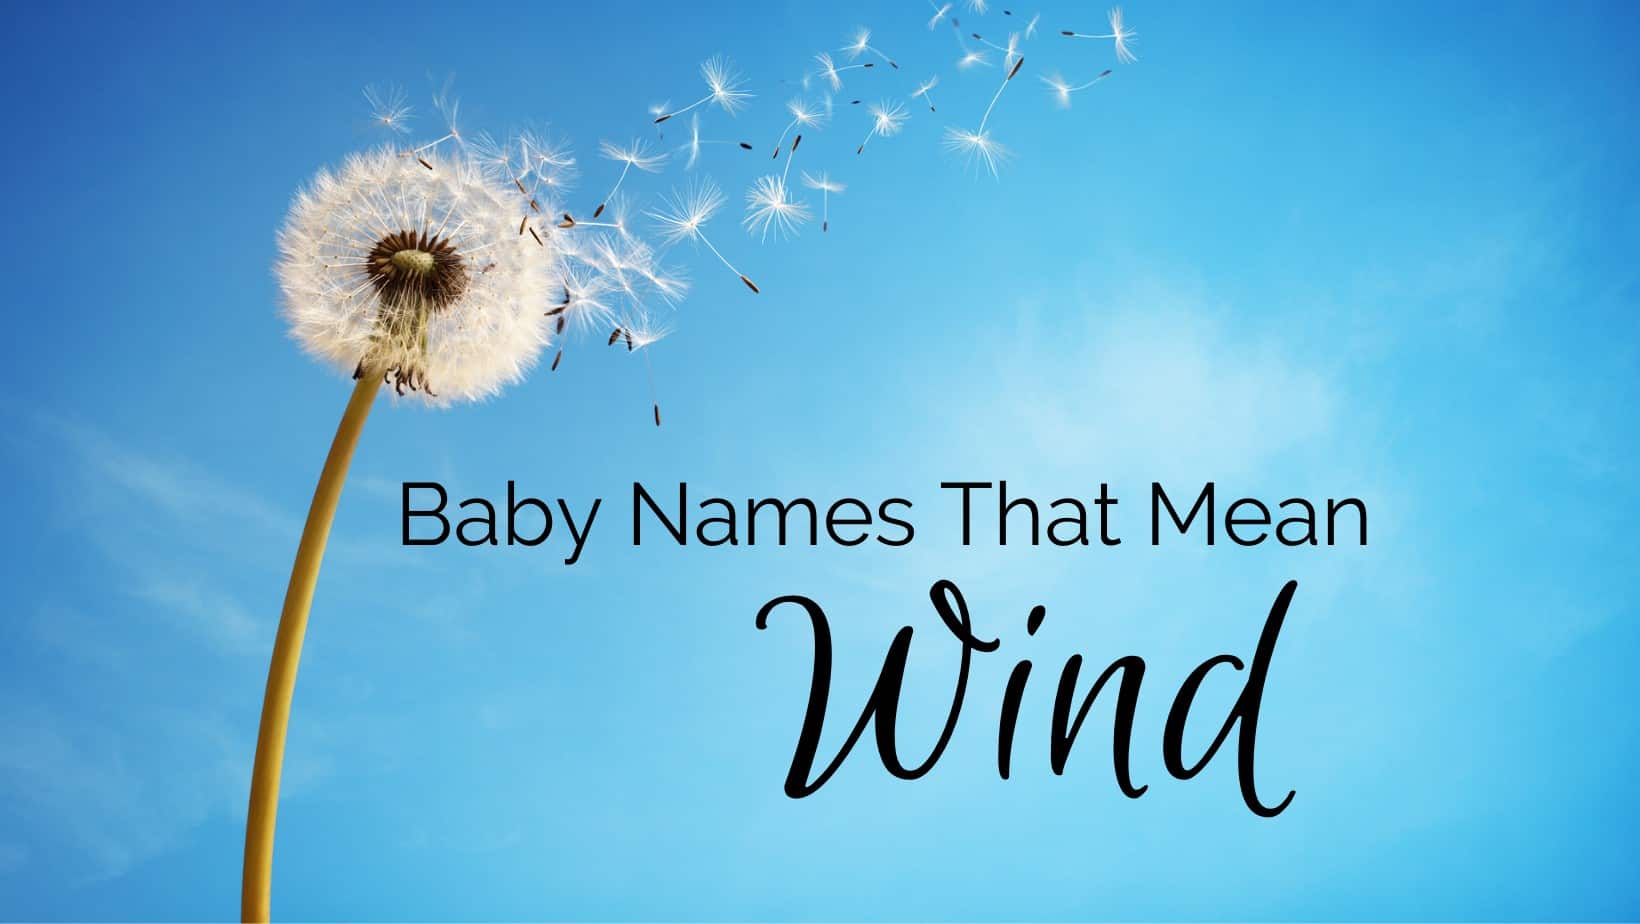 Baby Names That Mean Wind